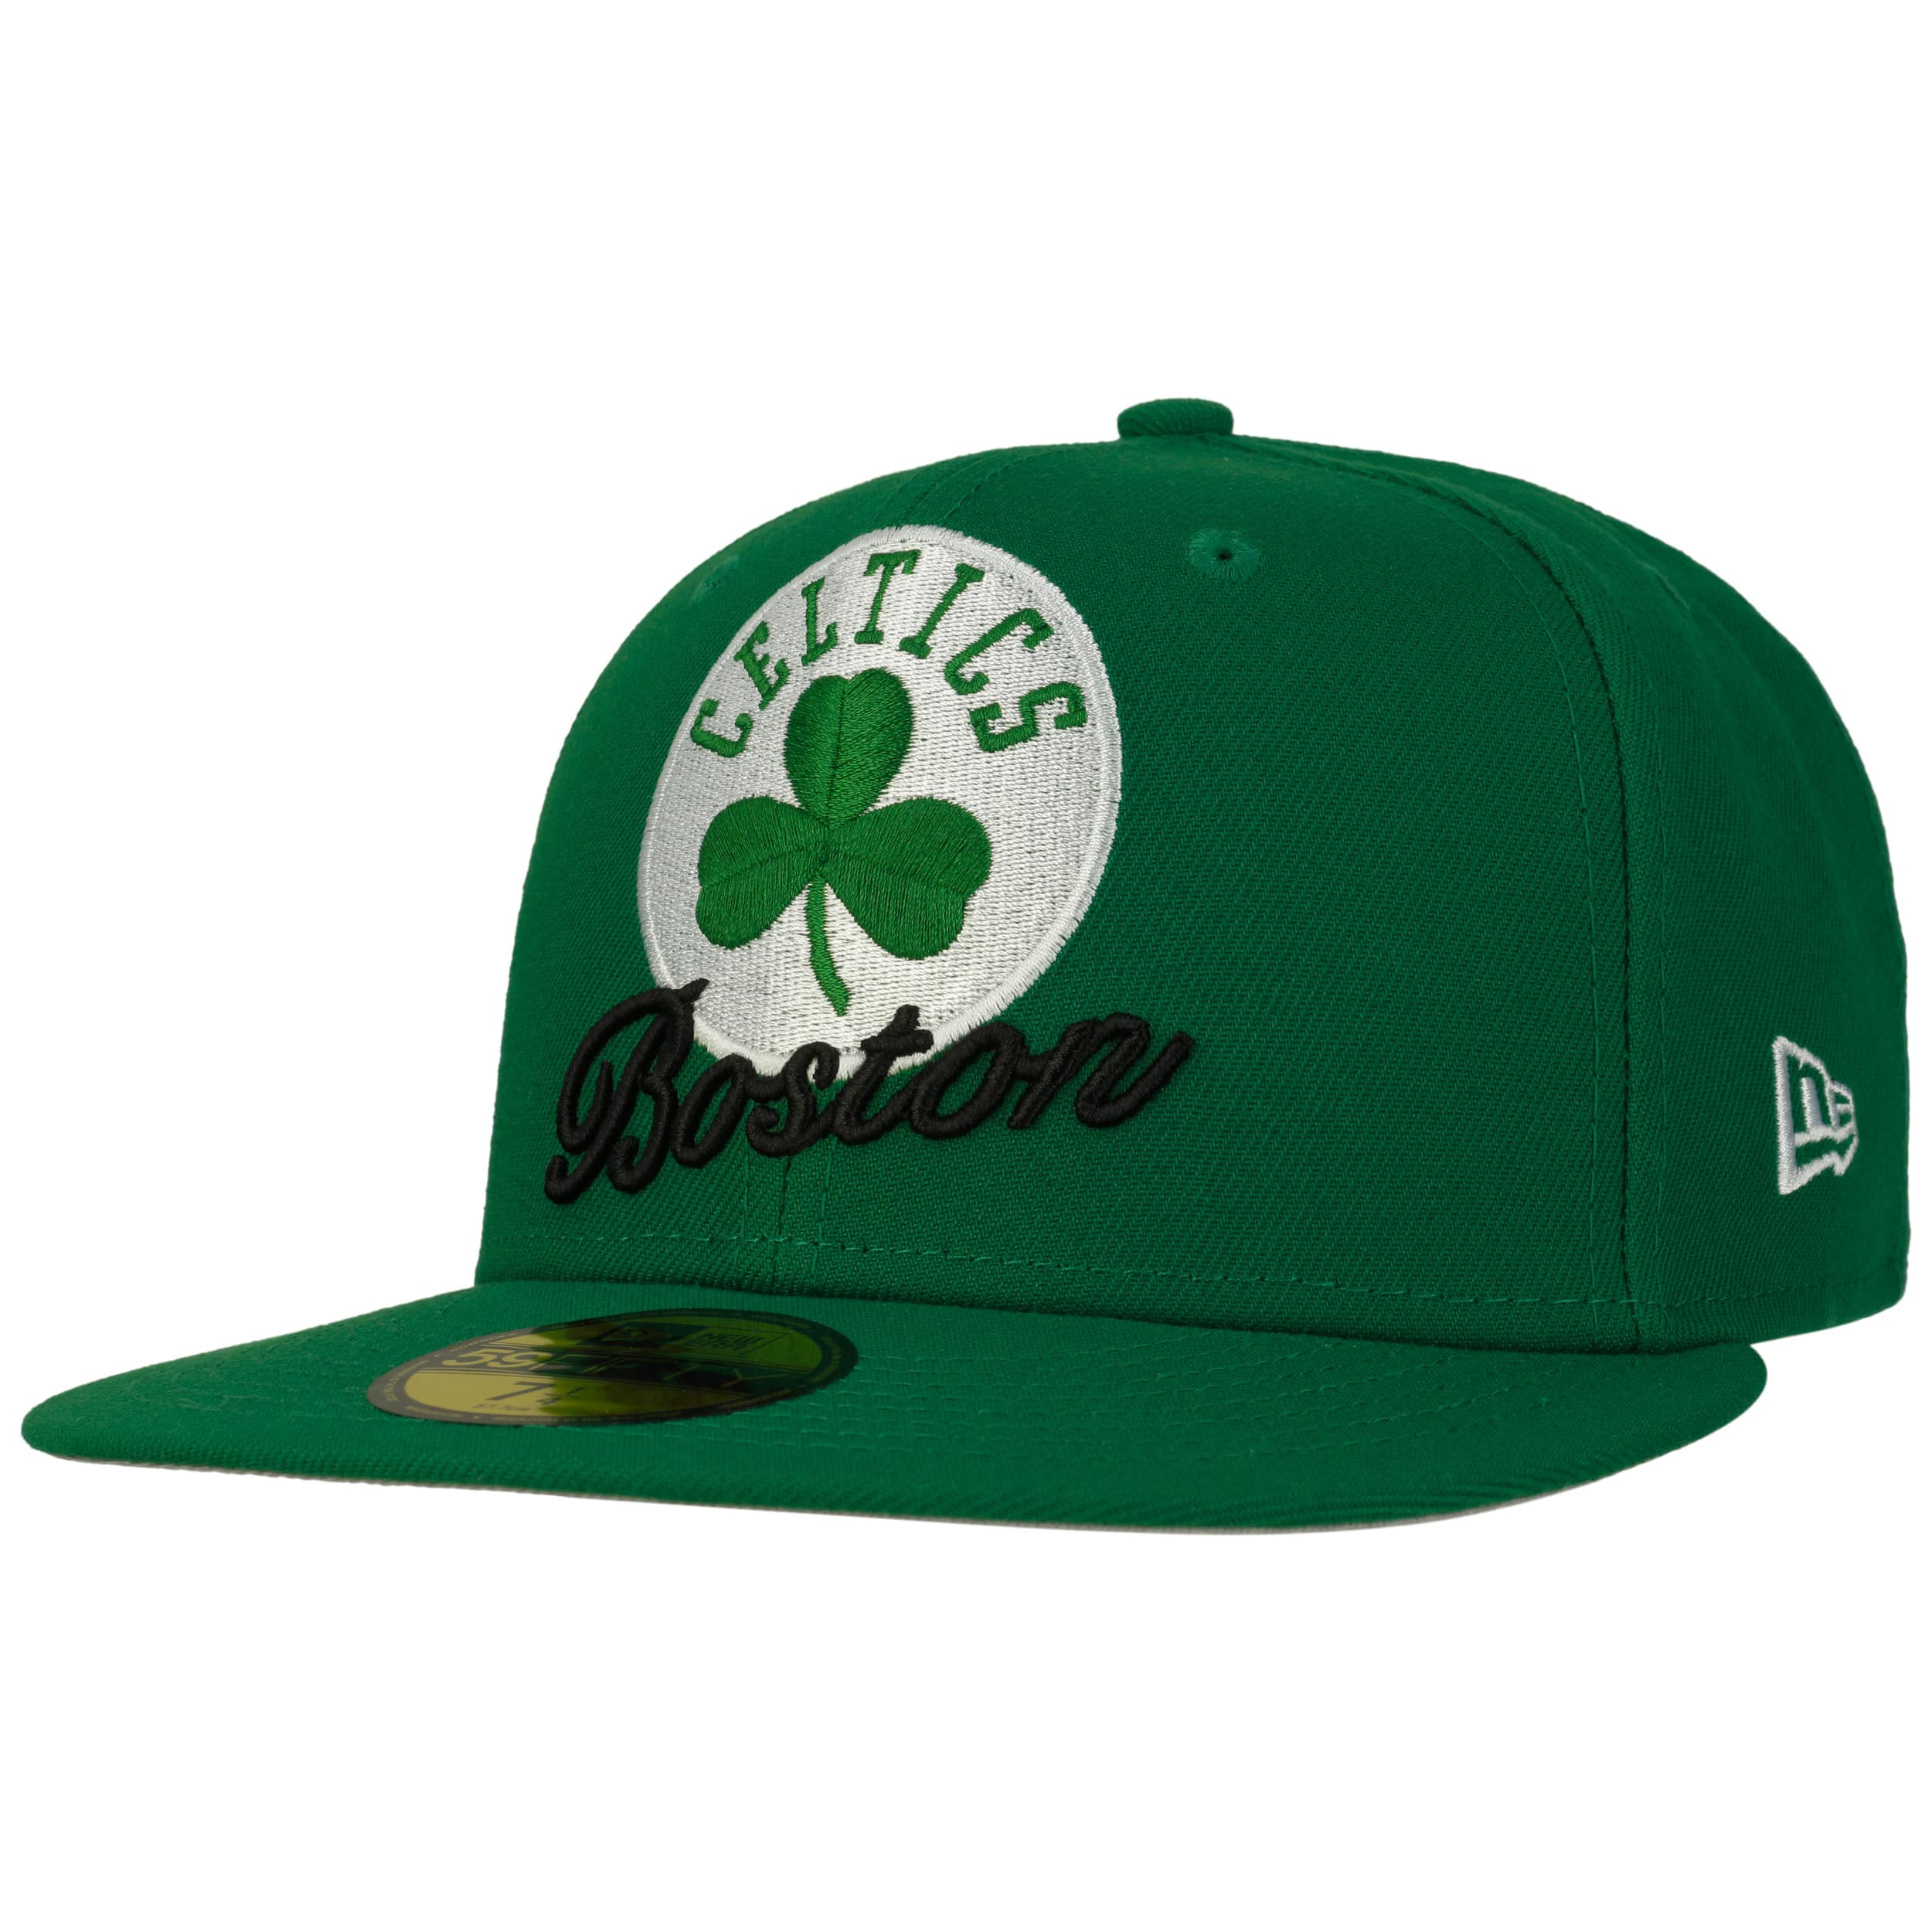 New Era Men's New Era Black Boston Celtics Quilted 59FIFTY Fitted Hat